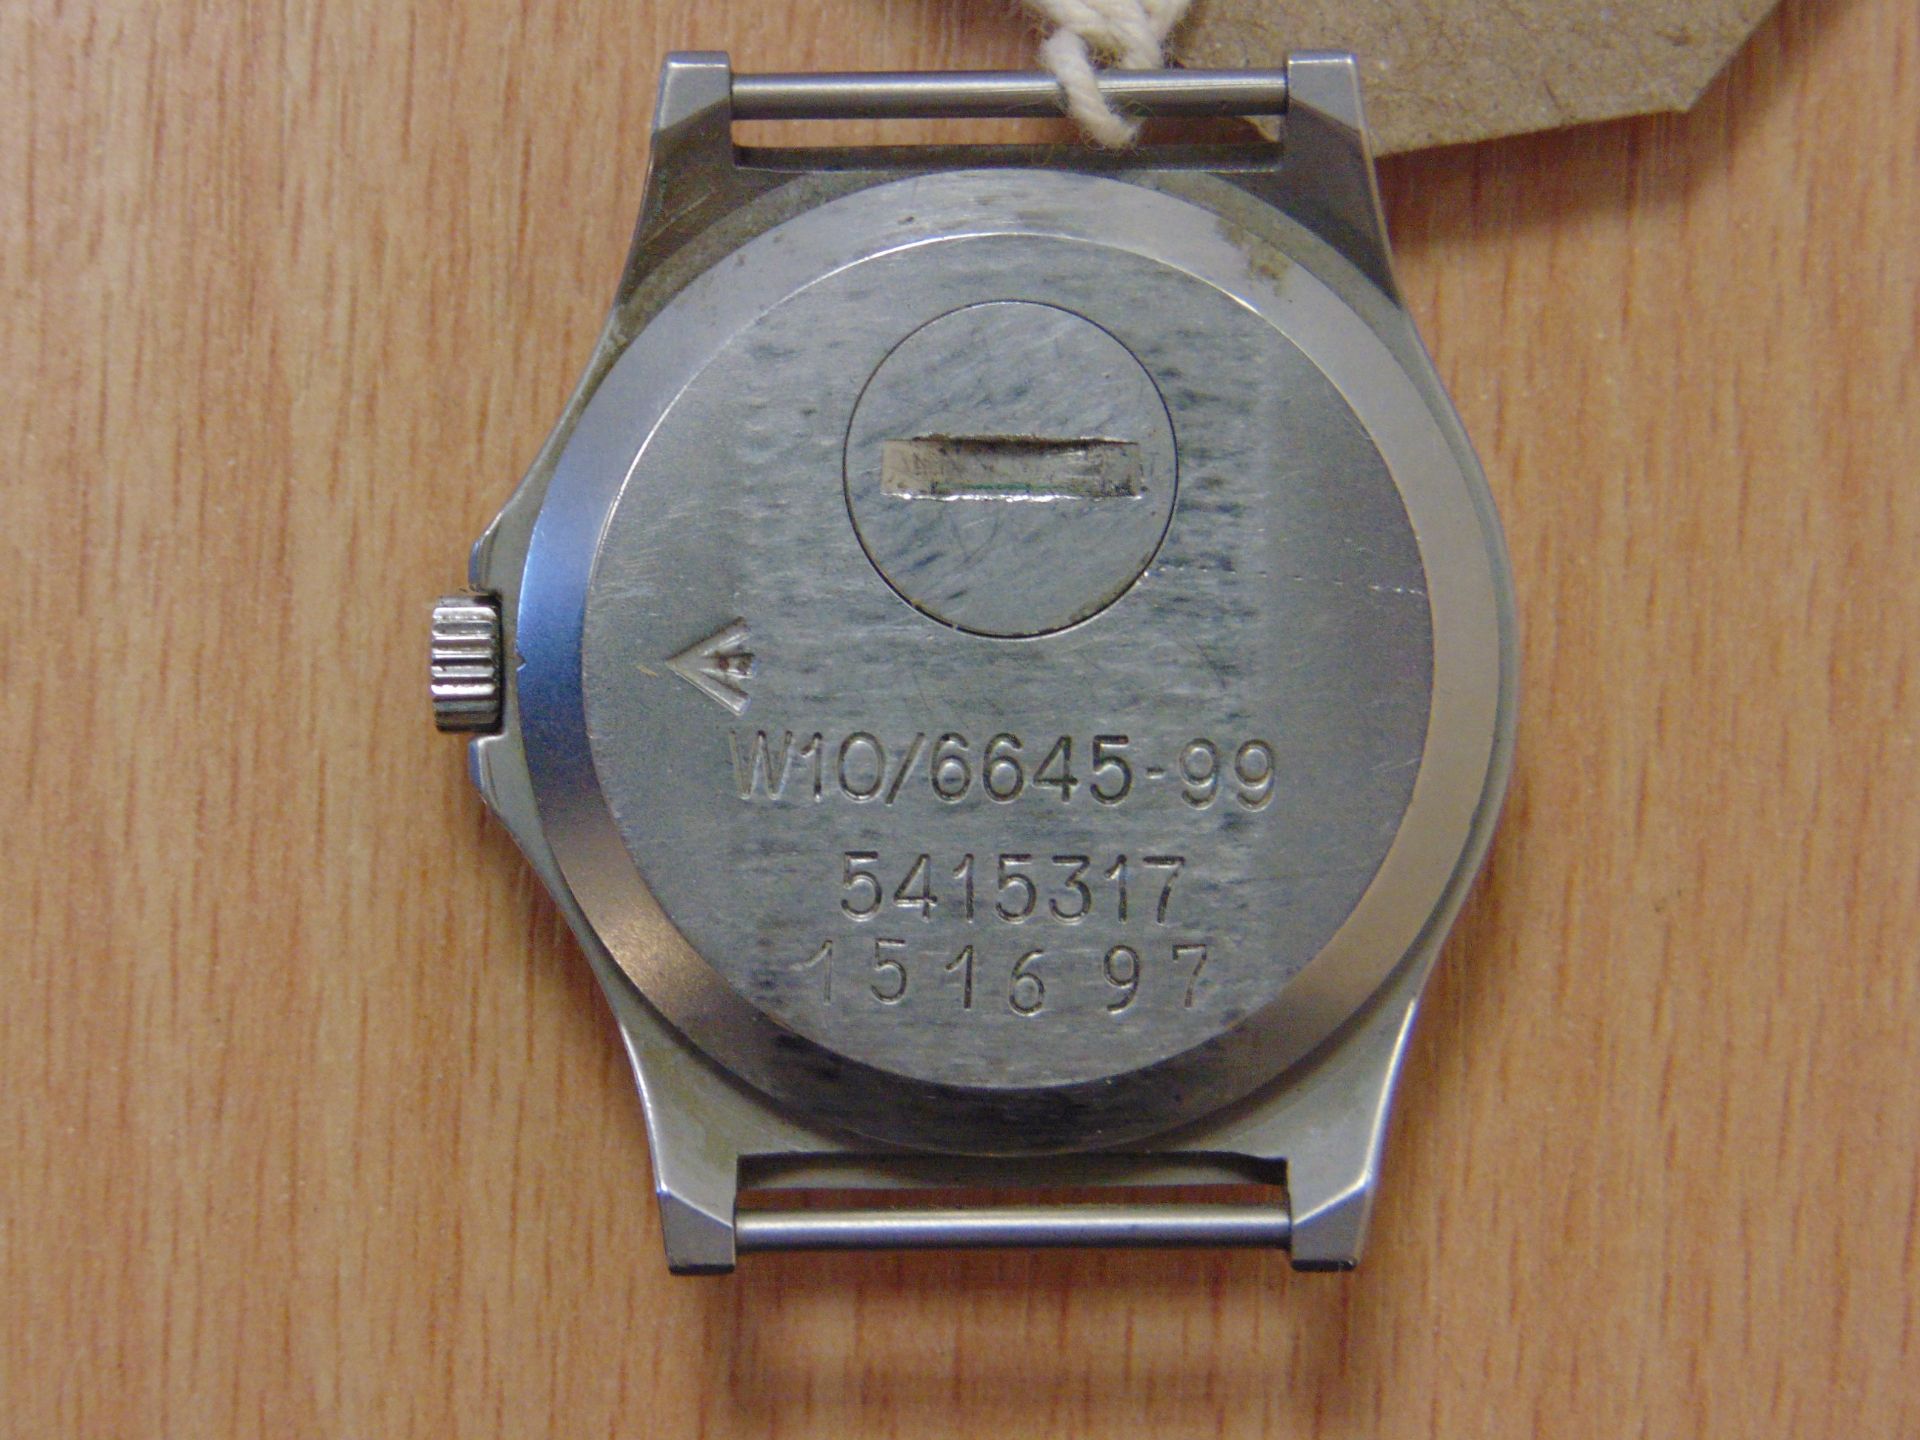 2X CWC W10 SERVICE WATCHES NATO NUMBERS DATE 1997 - Image 8 of 9